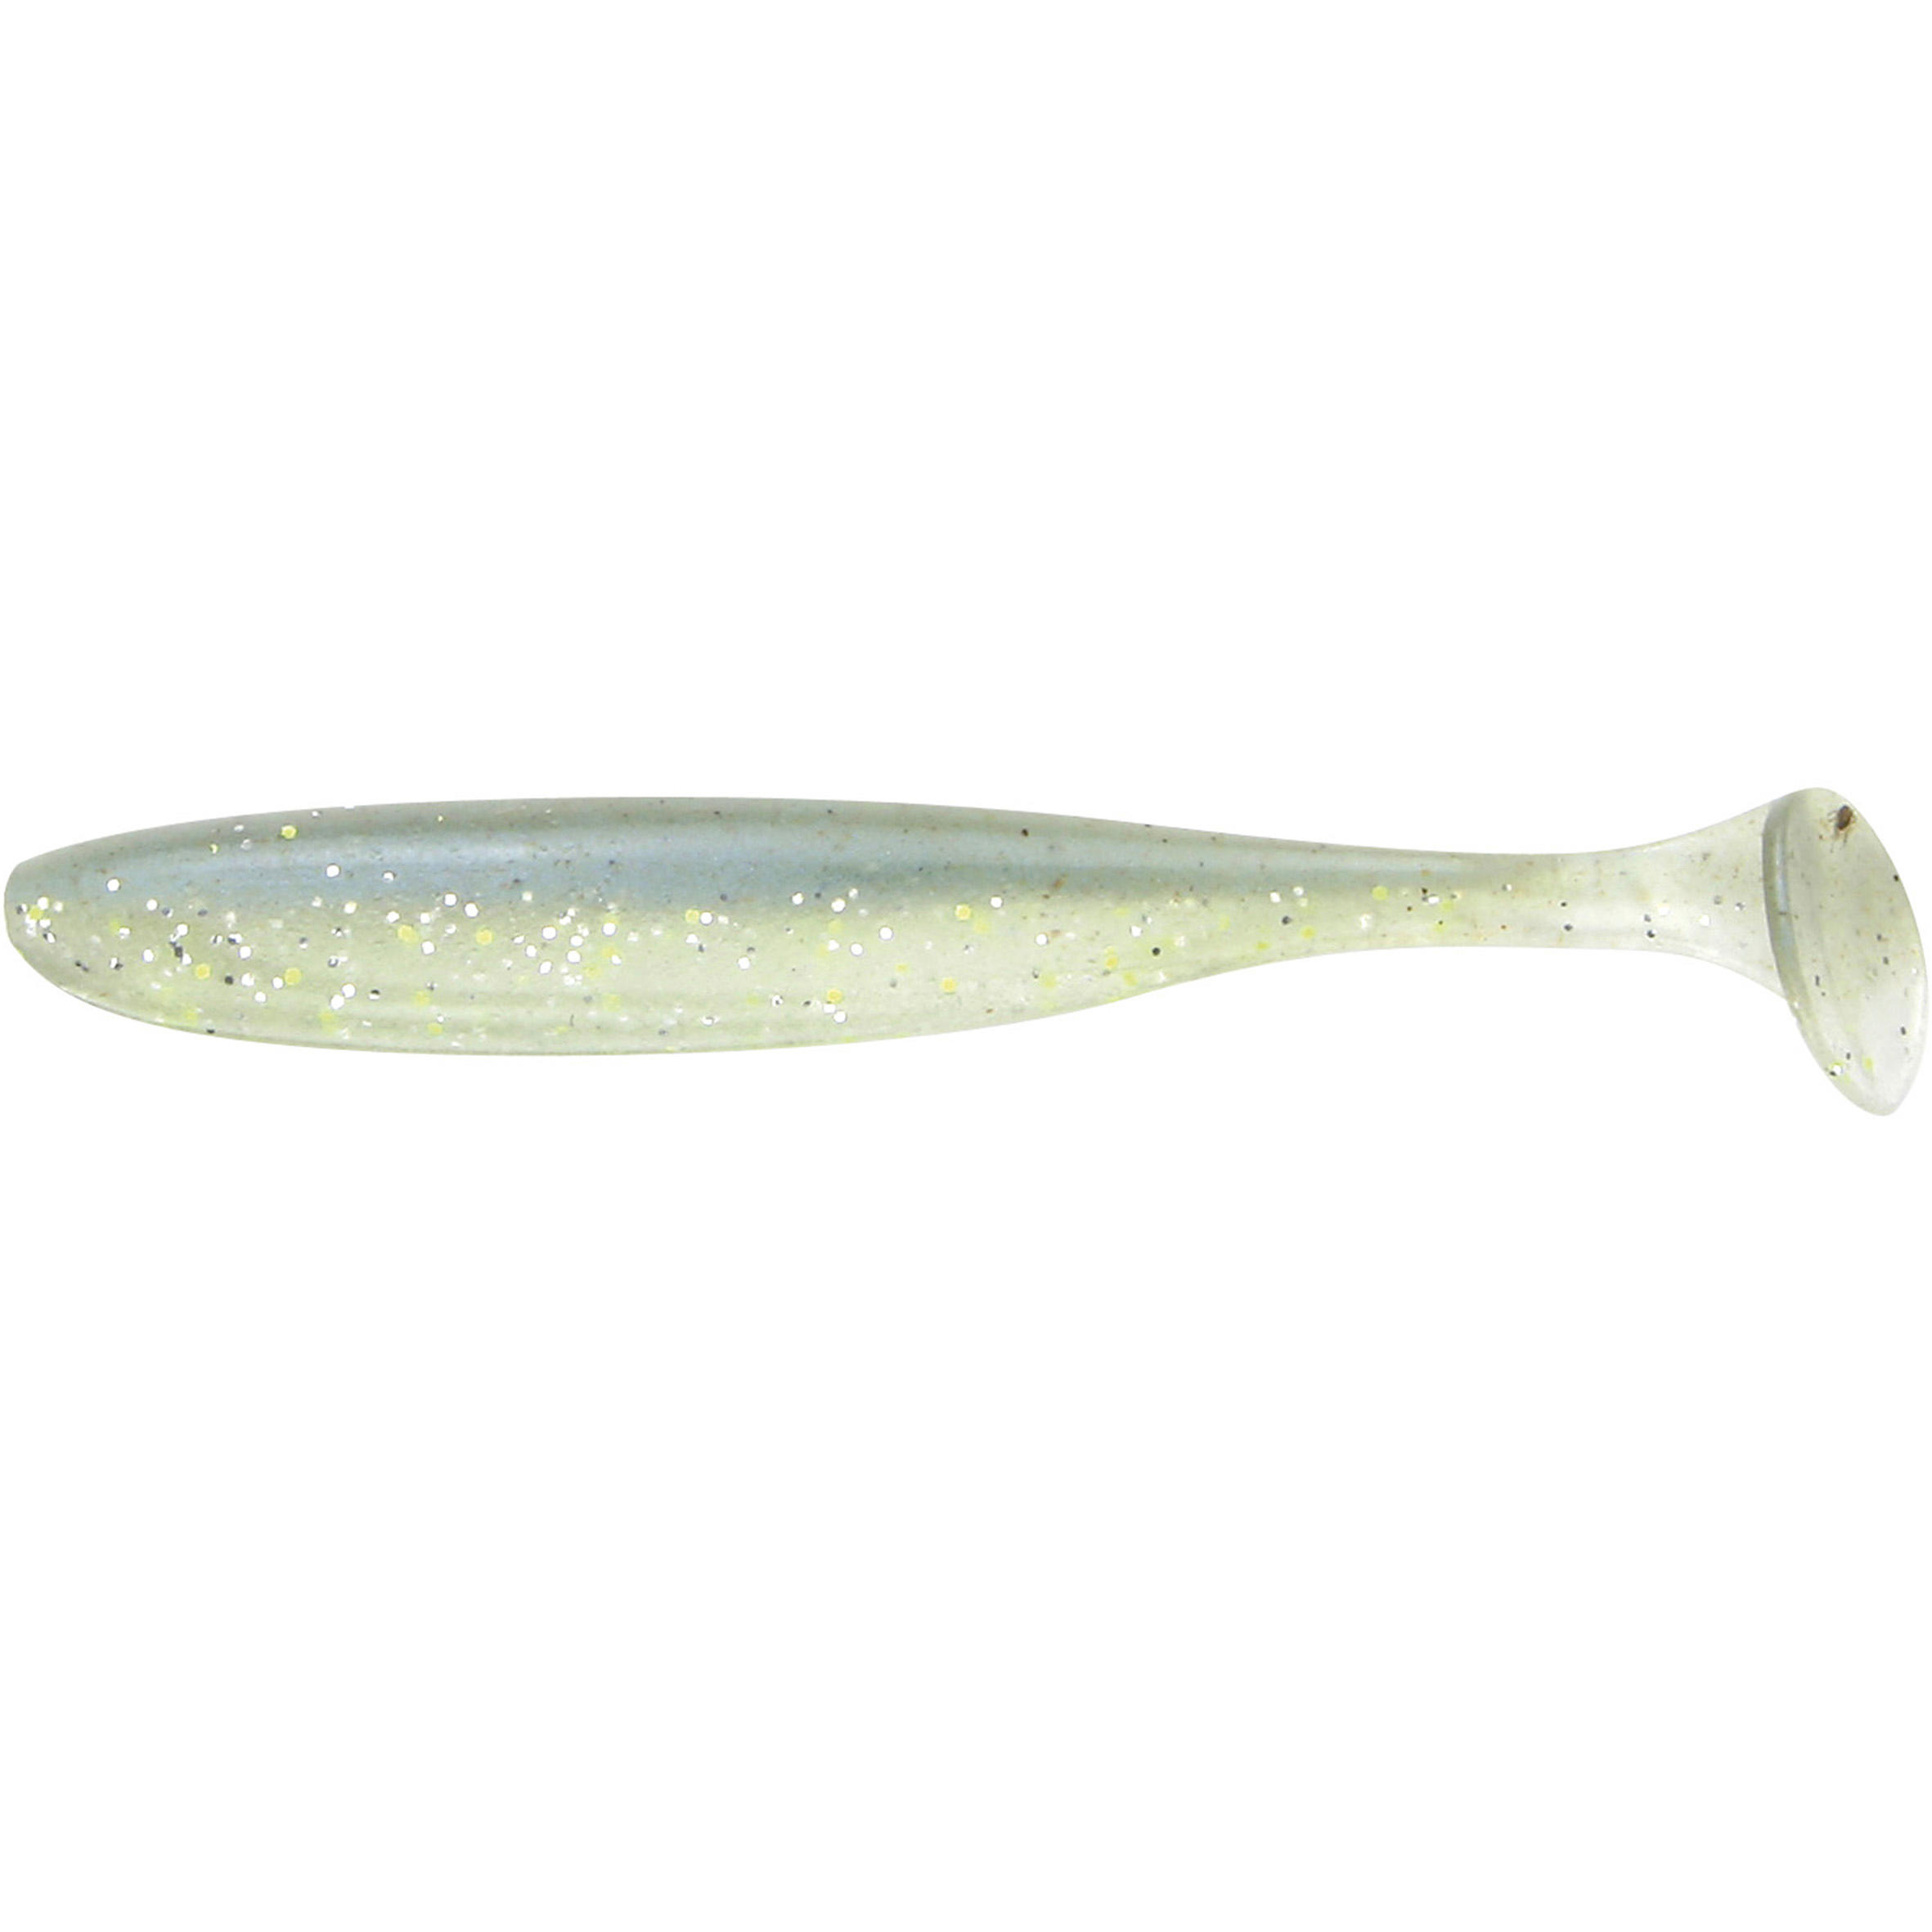 LURE FISHING SUPPLE LURE EASY SHINER 5 SEXY SHAD 1/1